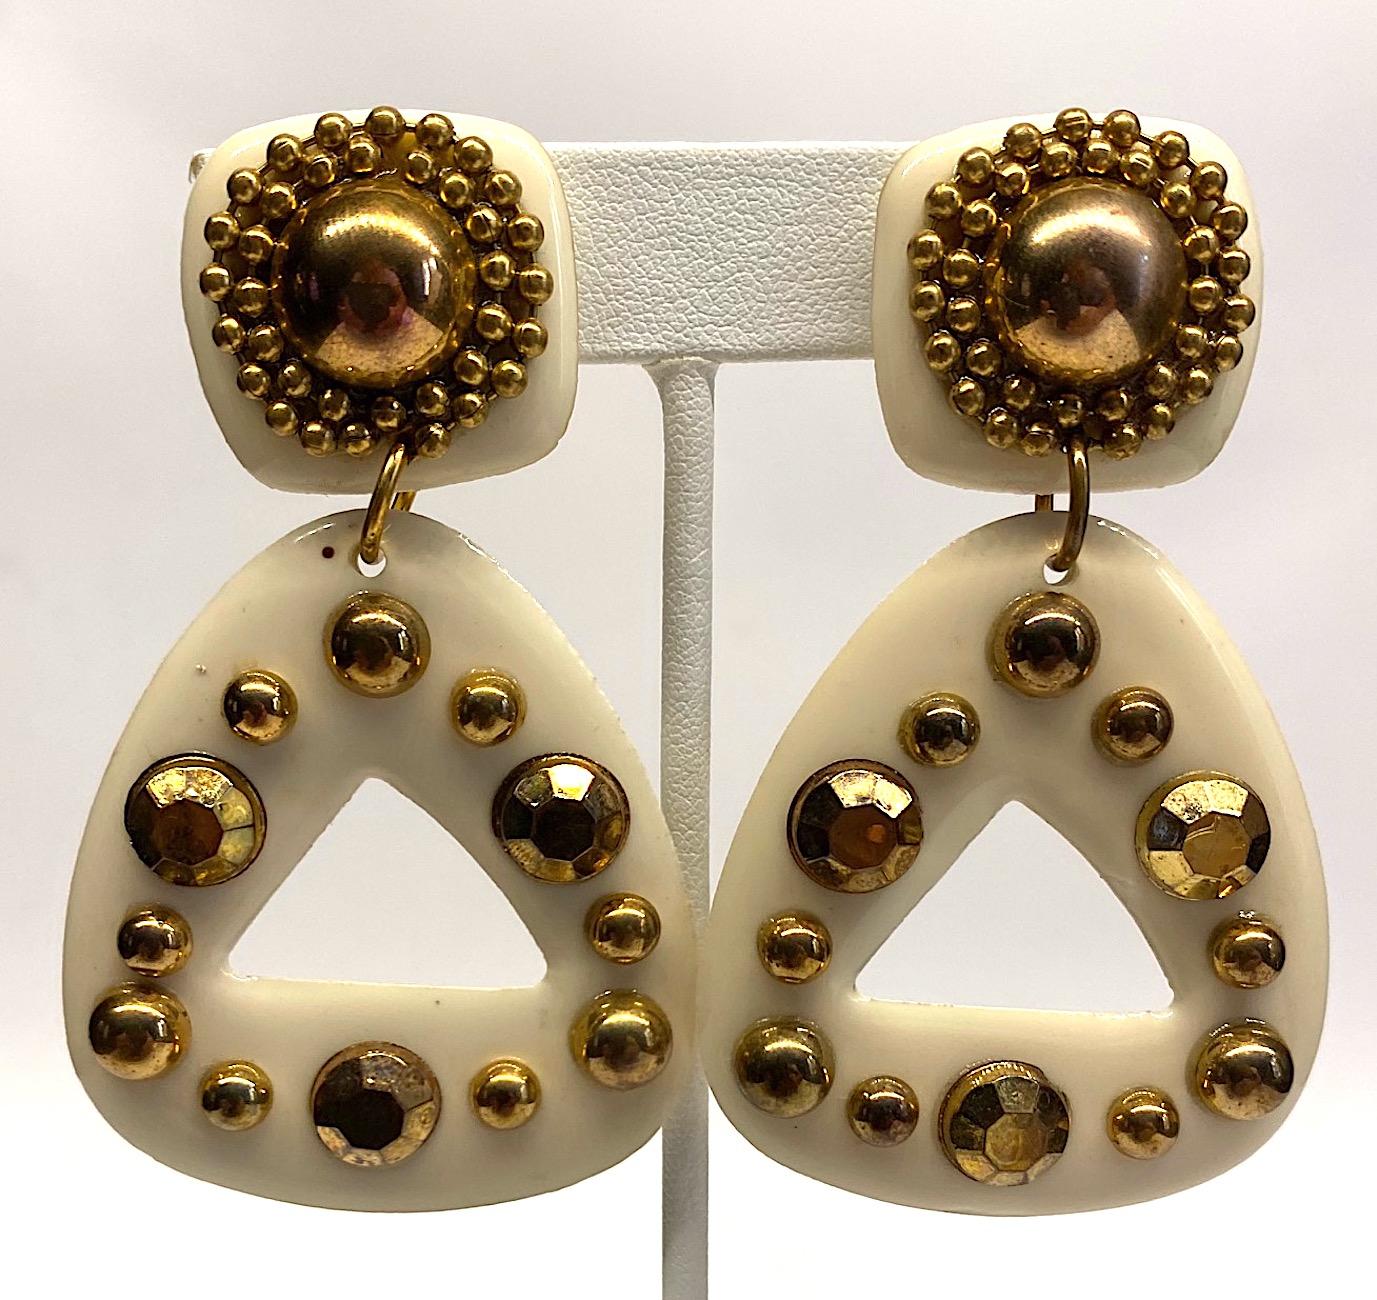 A very stylish pair of off white / cream resin or plastic earrings from the 1980s. The earrings are accented with applied gold tone studs and gold flat back crystals. The top piece with clip back is 1 inch square. The bottom triangular pendant is